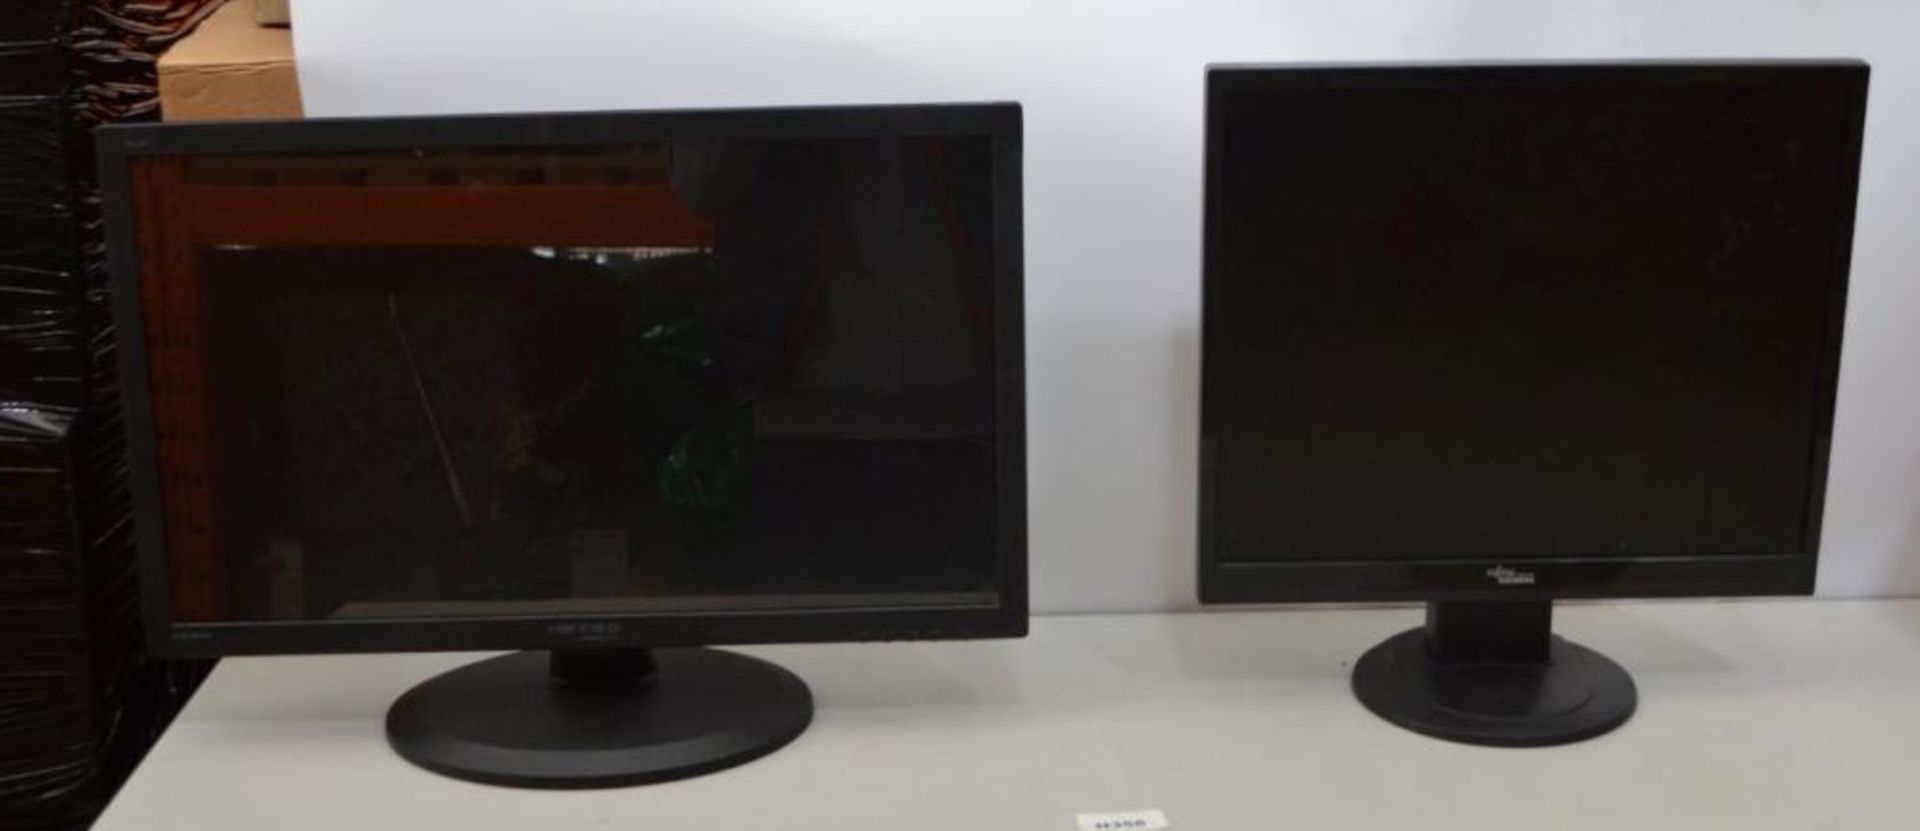 4 x Various Computer PC Monitors - Not Working / Unknown Faults - Ref H356 - CL394 - Location: Altri - Image 4 of 4